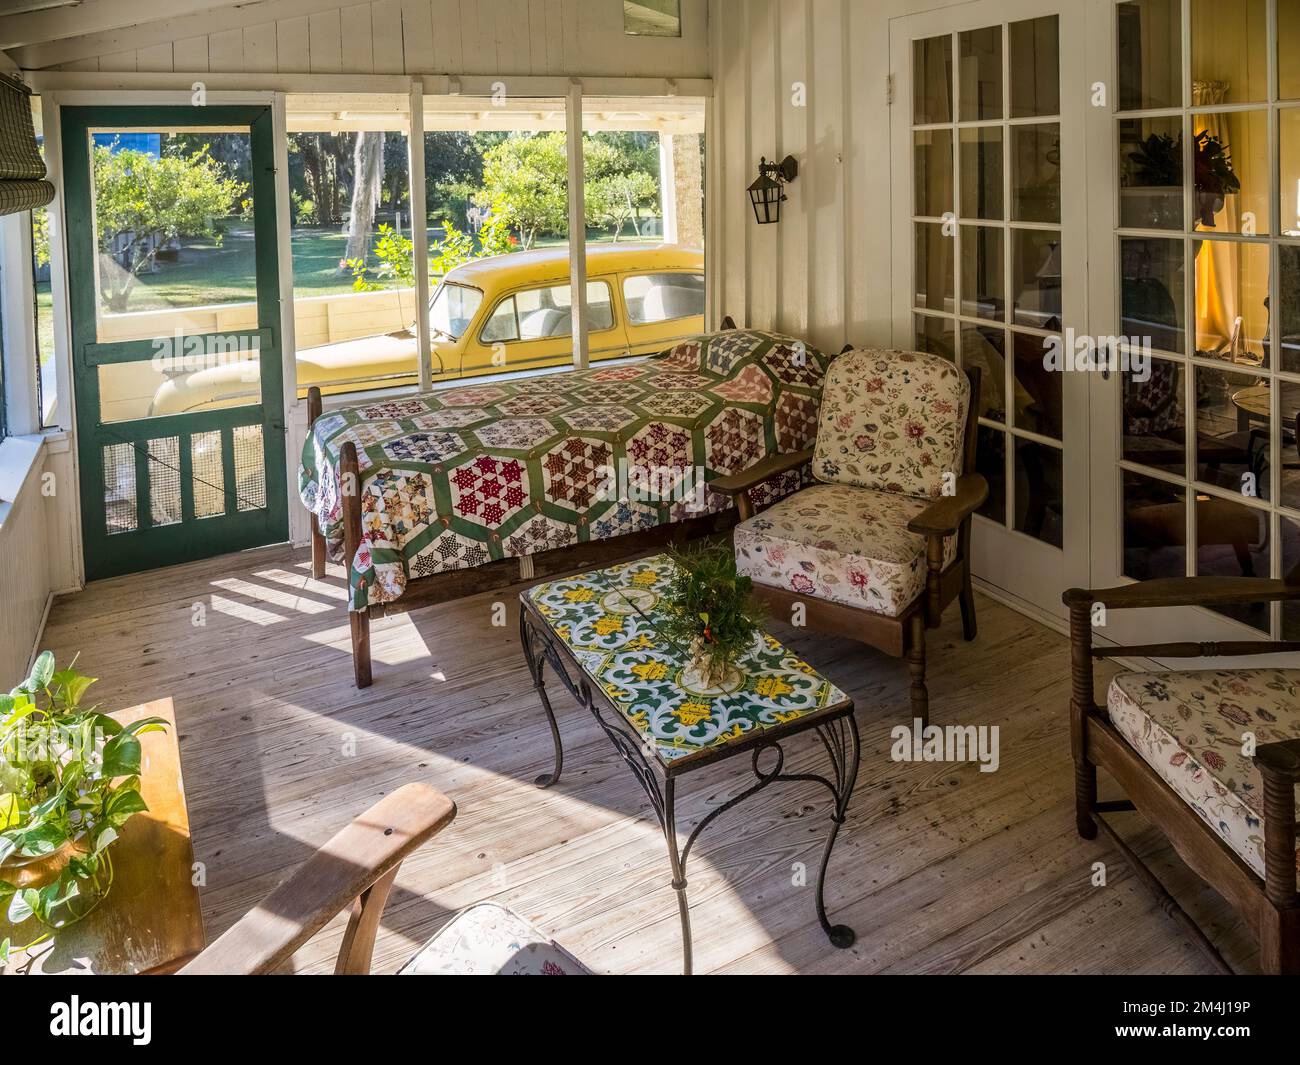 Interior of house at Marjorie Kinnan Rawlings Historic State Park an authentic Florida Cracker homestead in Cross Creek Florida USA Stock Photo